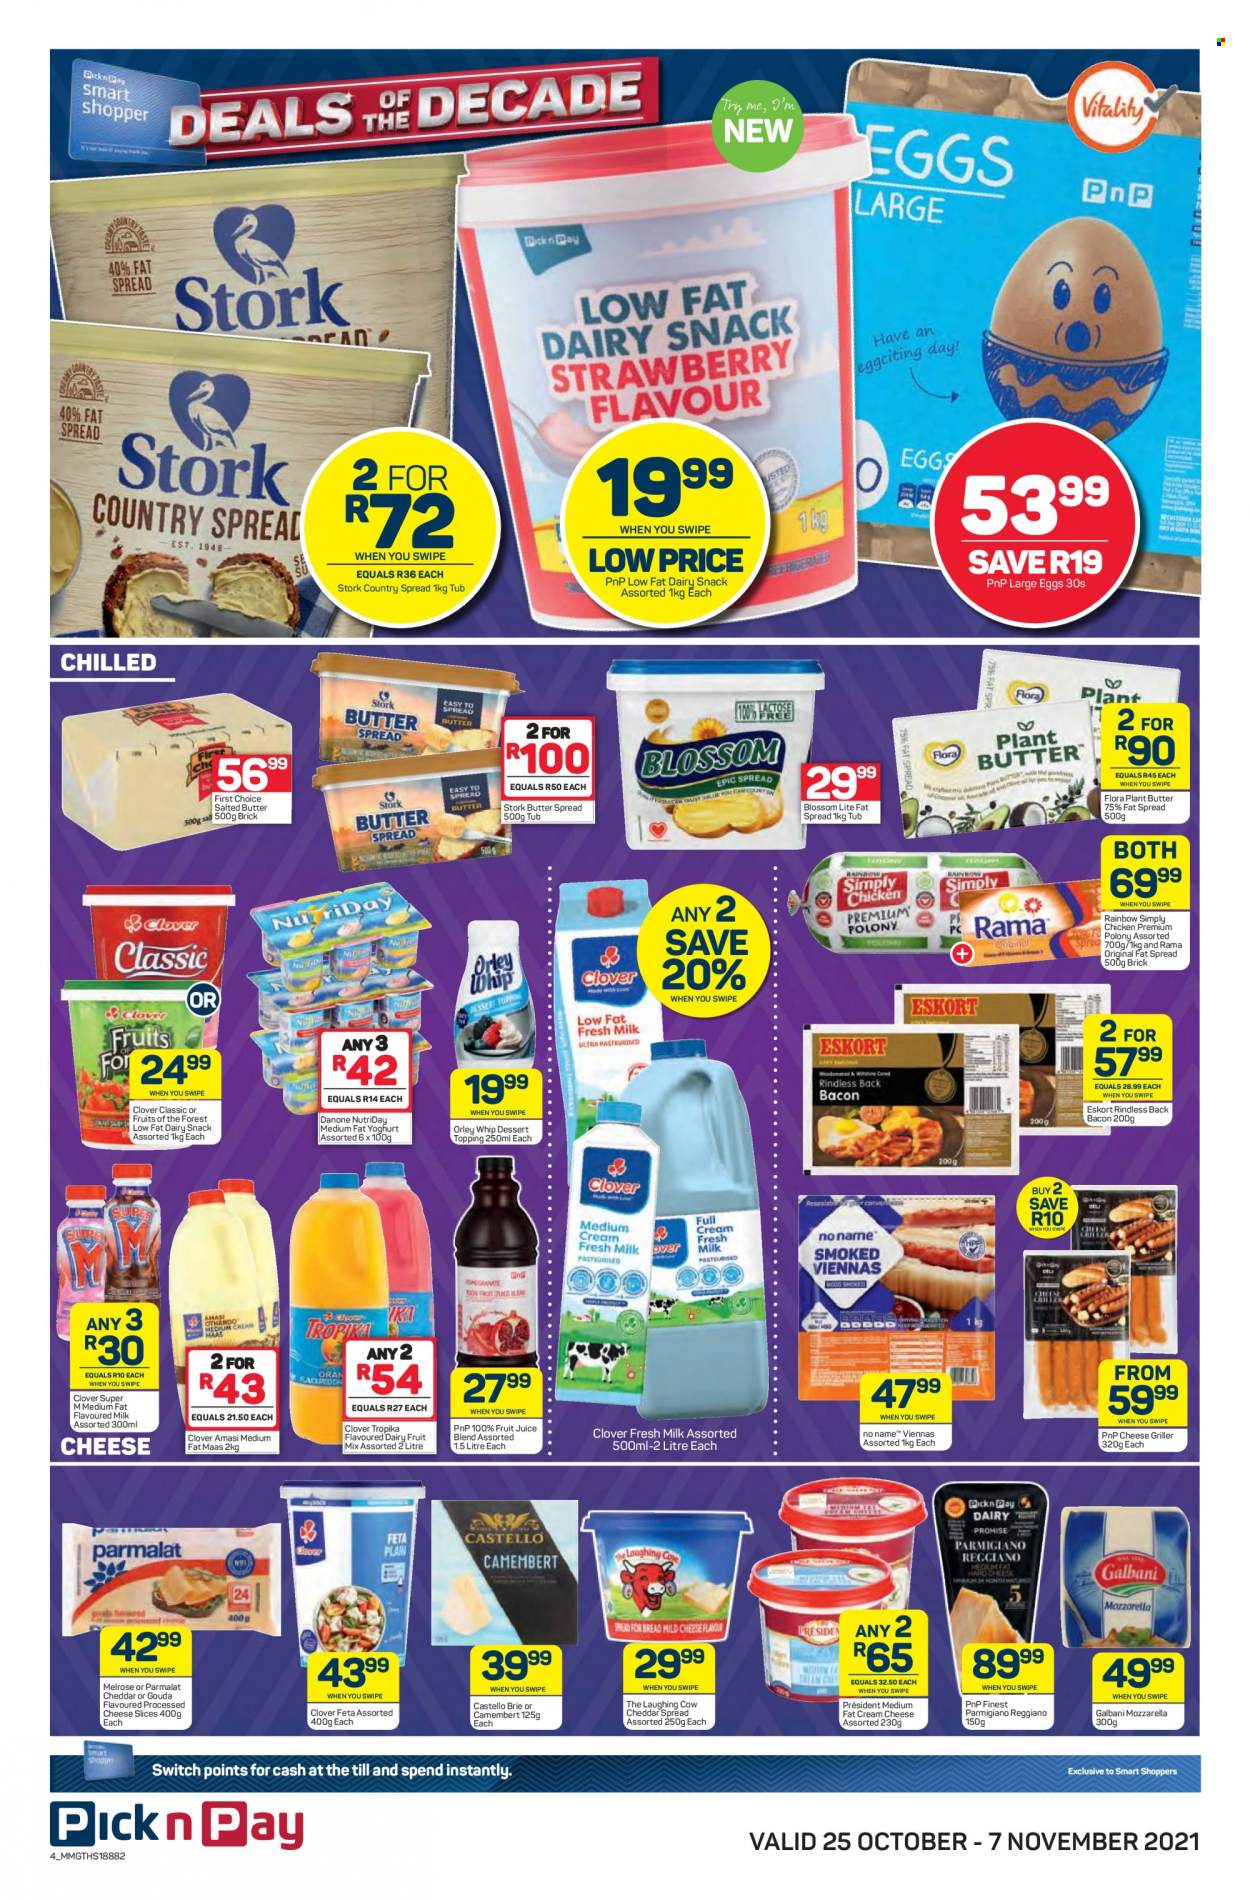 Pick n Pay specials - 10.25.2021 - 11.07.2021. 